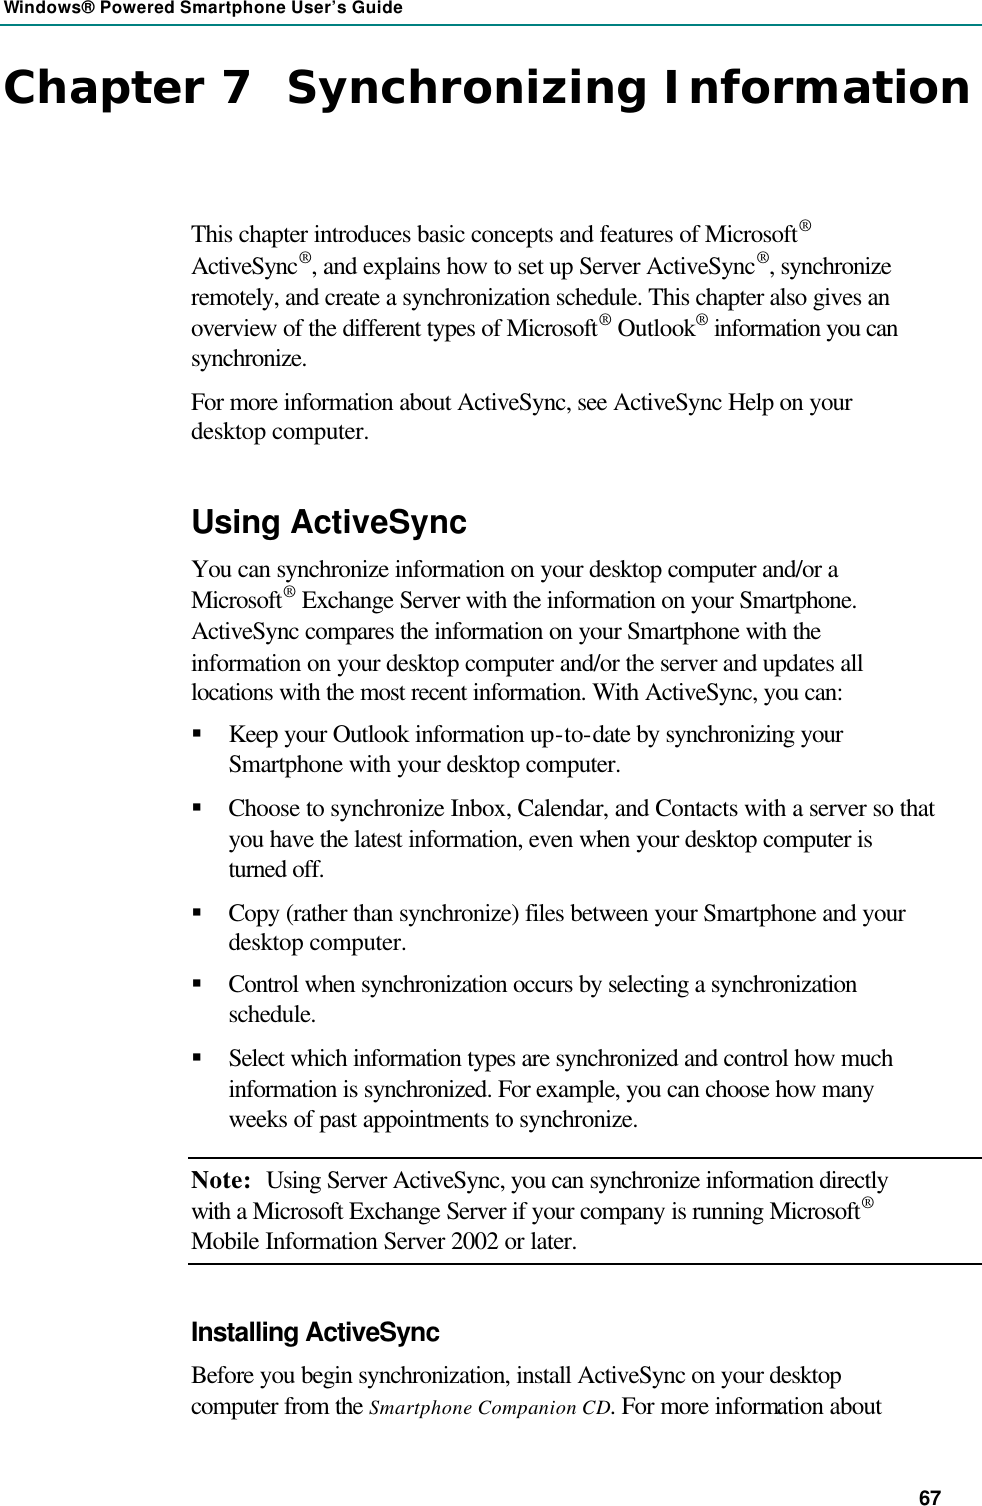 Windows® Powered Smartphone User’s Guide 67 Chapter 7  Synchronizing Information This chapter introduces basic concepts and features of Microsoft® ActiveSync®, and explains how to set up Server ActiveSync®, synchronize remotely, and create a synchronization schedule. This chapter also gives an overview of the different types of Microsoft® Outlook® information you can synchronize. For more information about ActiveSync, see ActiveSync Help on your desktop computer. Using ActiveSync You can synchronize information on your desktop computer and/or a Microsoft® Exchange Server with the information on your Smartphone. ActiveSync compares the information on your Smartphone with the information on your desktop computer and/or the server and updates all locations with the most recent information. With ActiveSync, you can: § Keep your Outlook information up-to-date by synchronizing your Smartphone with your desktop computer. § Choose to synchronize Inbox, Calendar, and Contacts with a server so that you have the latest information, even when your desktop computer is turned off. § Copy (rather than synchronize) files between your Smartphone and your desktop computer. § Control when synchronization occurs by selecting a synchronization schedule. § Select which information types are synchronized and control how much information is synchronized. For example, you can choose how many weeks of past appointments to synchronize. Note: Using Server ActiveSync, you can synchronize information directly with a Microsoft Exchange Server if your company is running Microsoft® Mobile Information Server 2002 or later. Installing ActiveSync Before you begin synchronization, install ActiveSync on your desktop computer from the Smartphone Companion CD. For more information about 